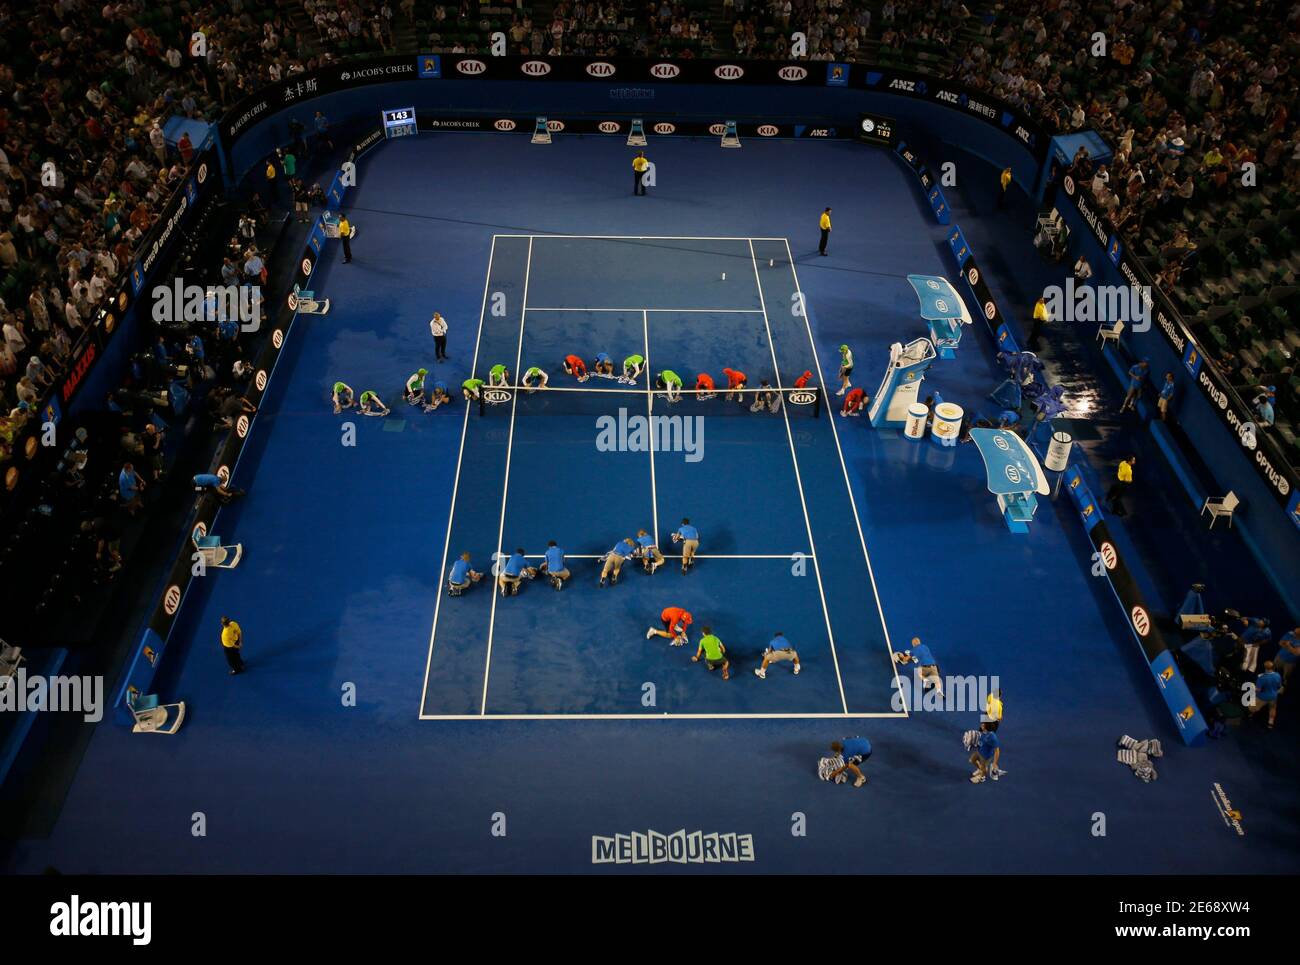 Officials dry court of rain on Rod Laver Arena at the Australian Open 2014 tennis tournament in Melbourne January 17, 2014. REUTERS/Jason Reed ( AUSTRALIA - Tags: SPORT TENNIS Stock Photo - Alamy